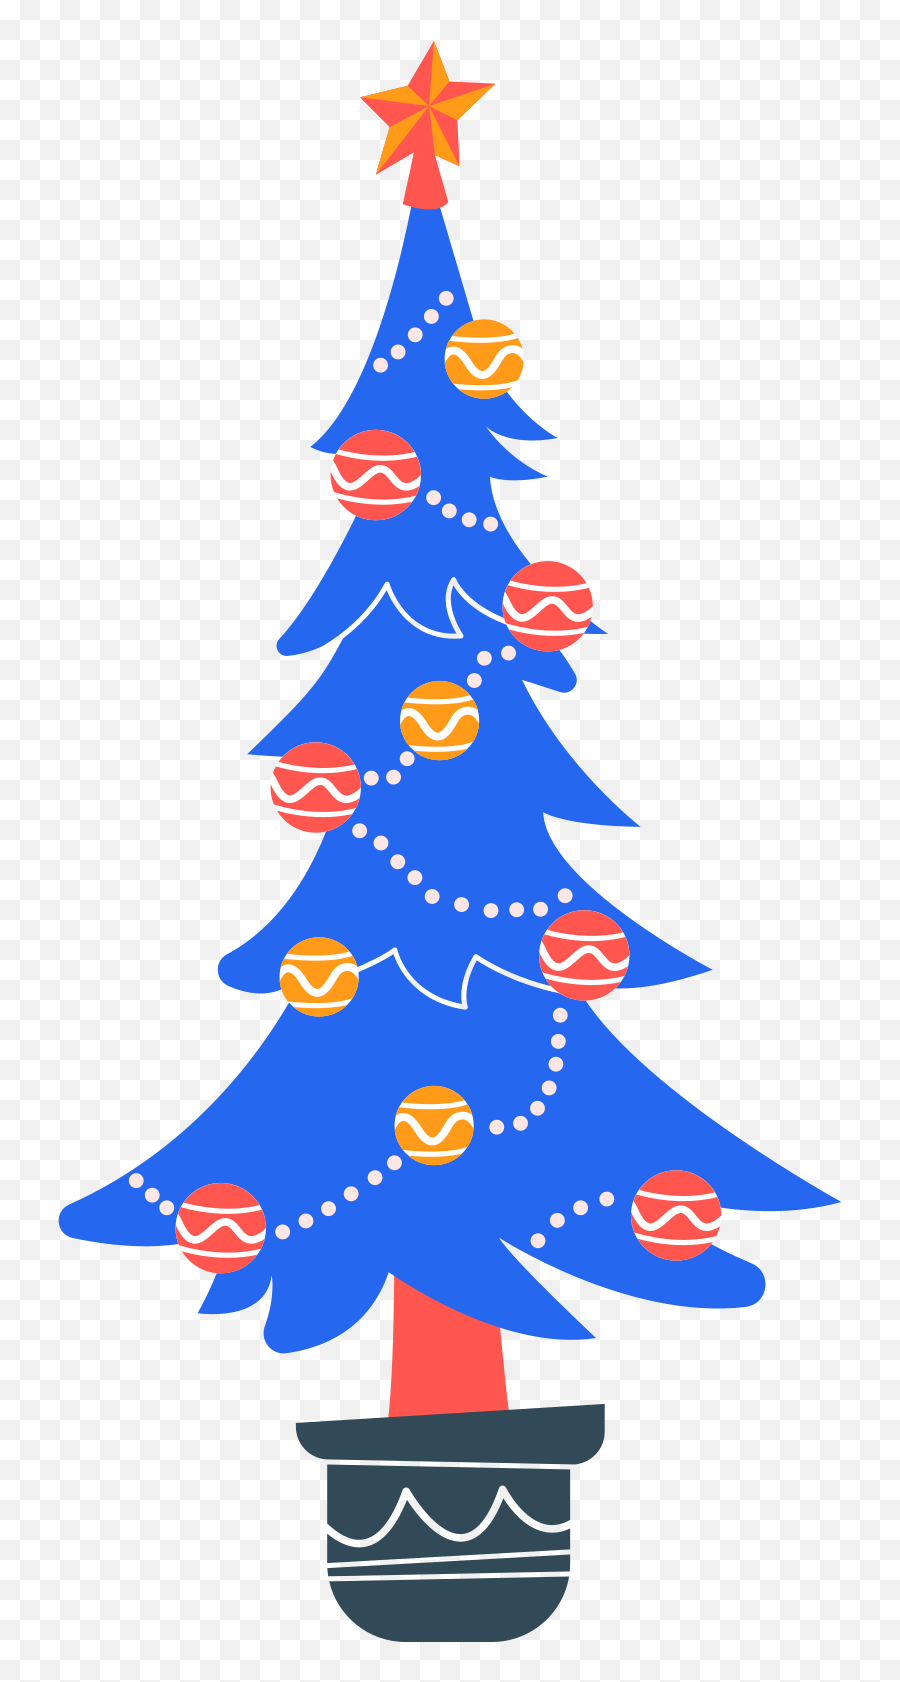 Style Christmas Tree Vector Images In Png And Svg Icons8 - Christmas Illustration Art,Tree Icon Vector Free Download